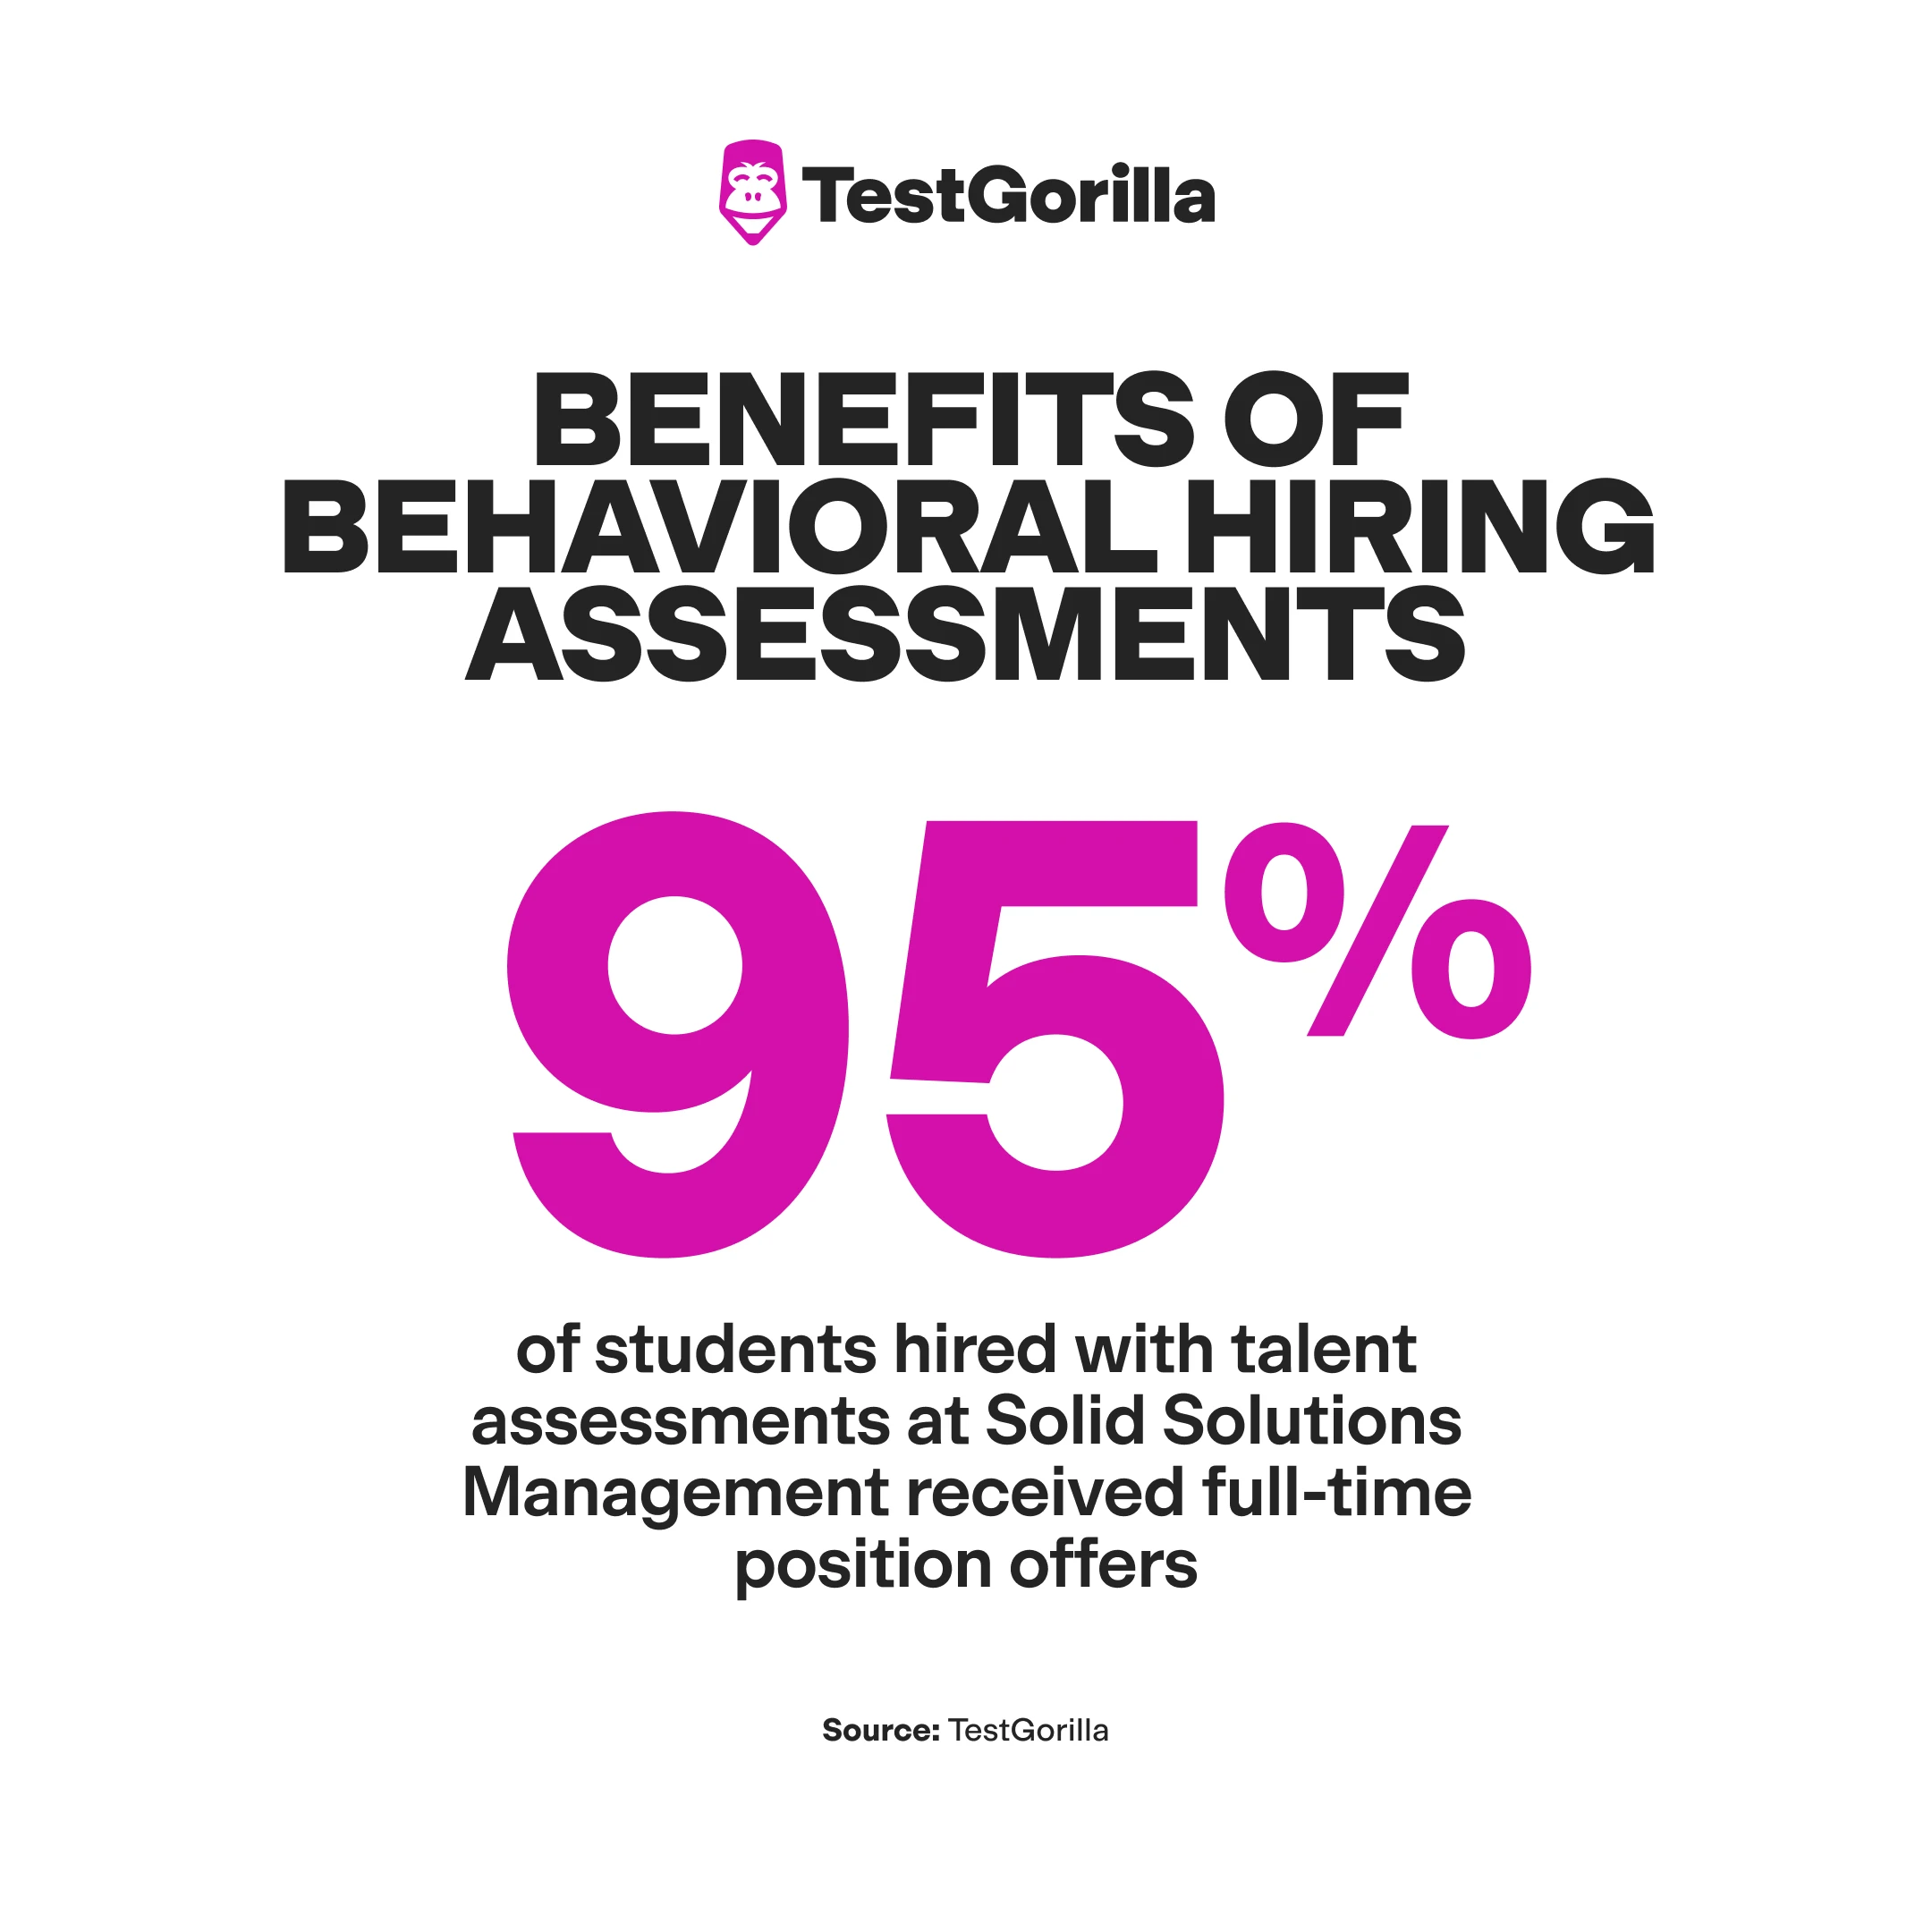 Benefits of behavioral hiring assessments graphic